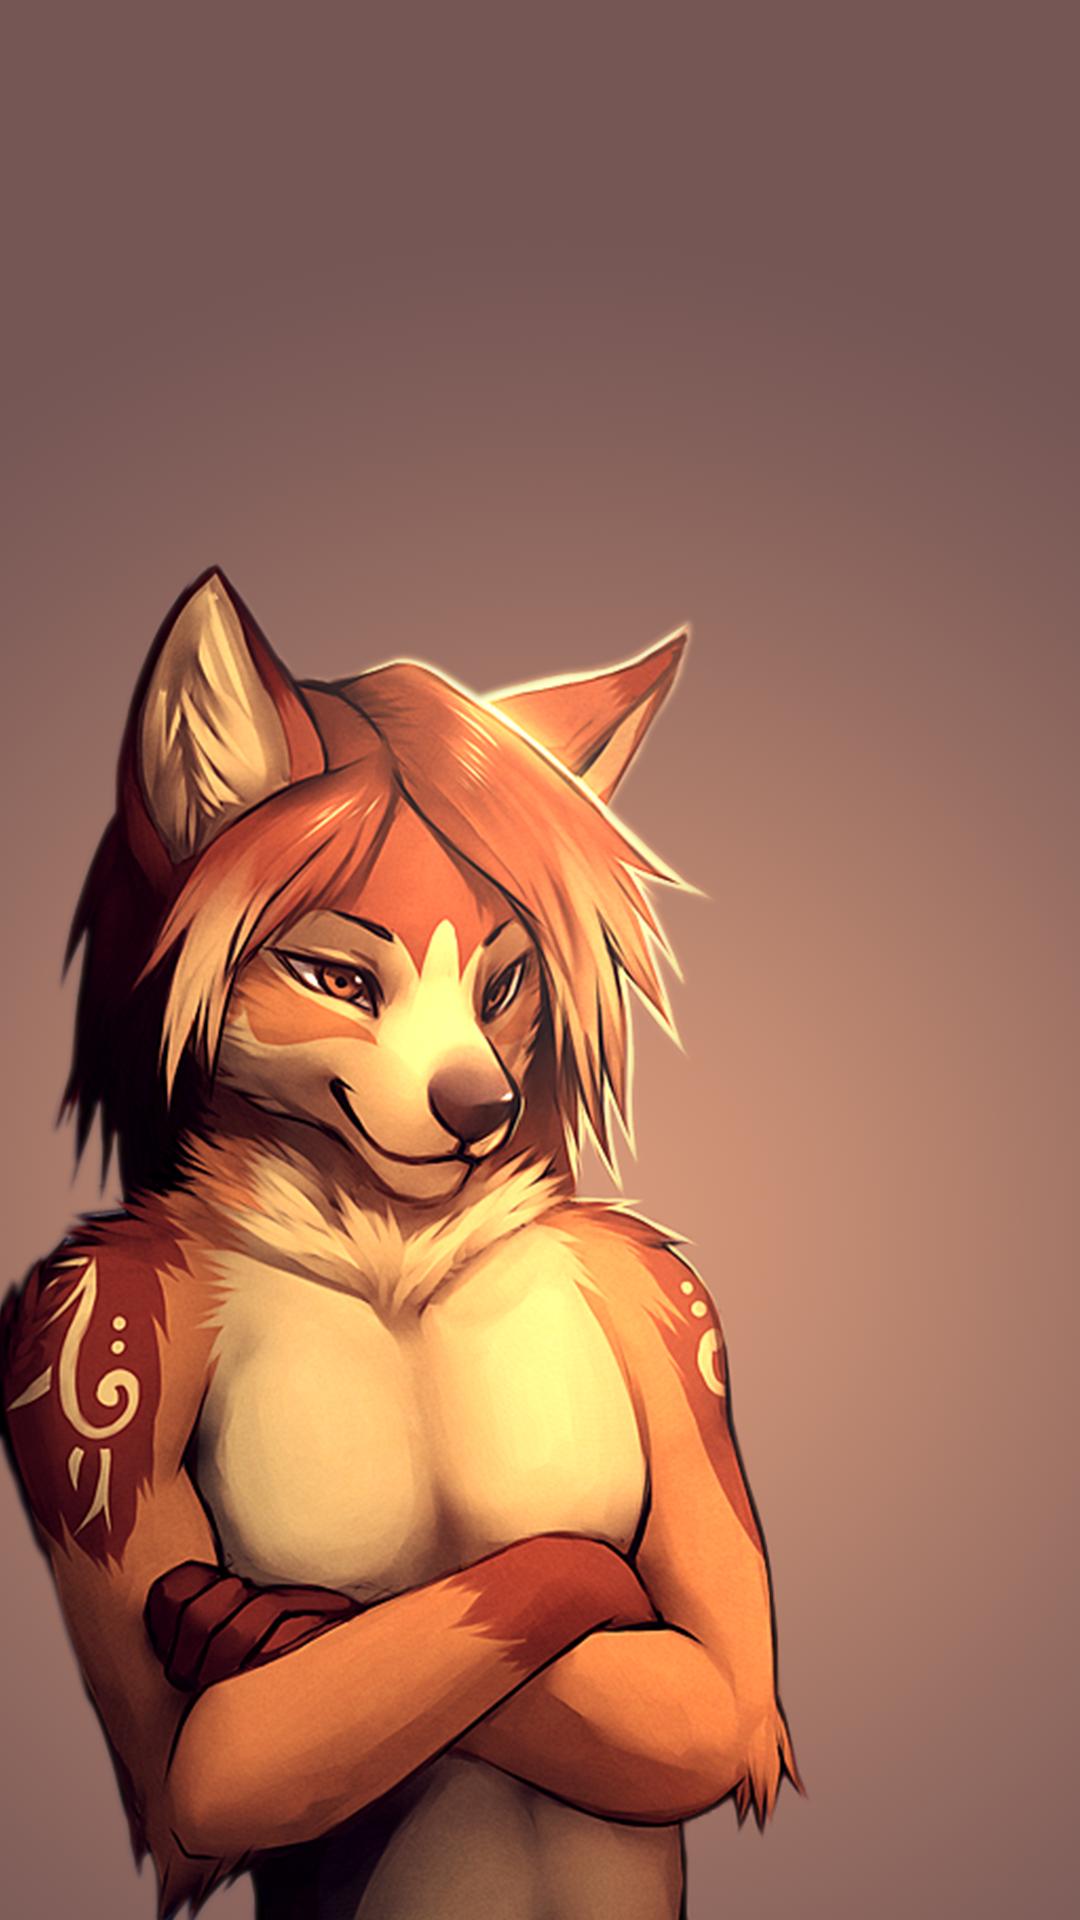 Can't use furry wallpapers without people wondering if I'm a furry ...